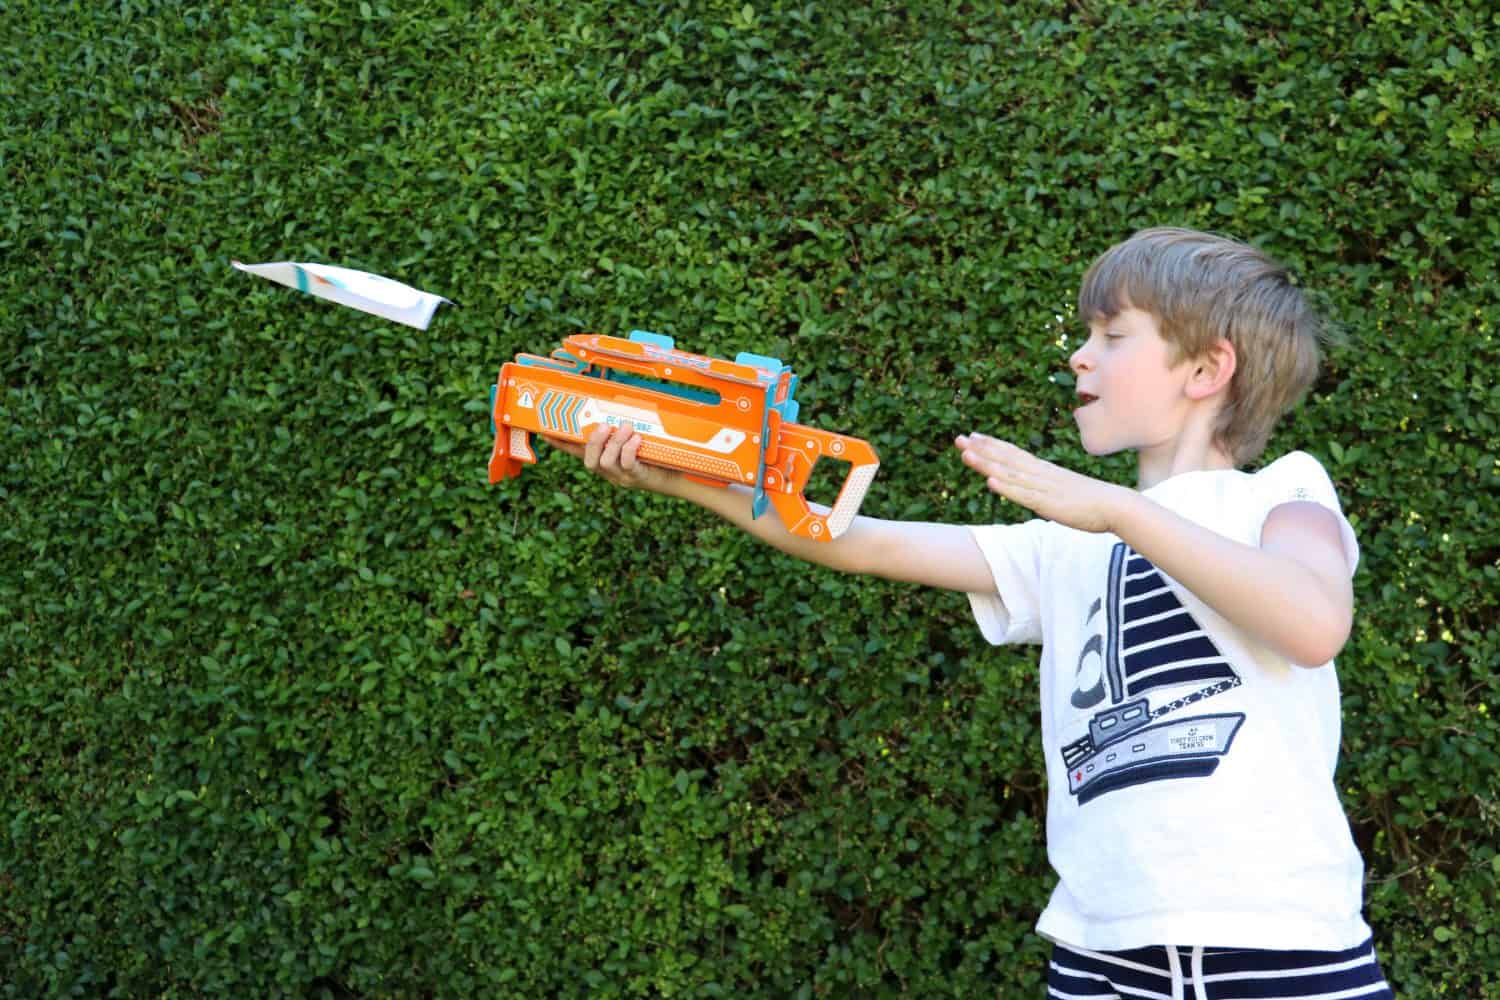 Build Your Own Plane Launcher Kit Review